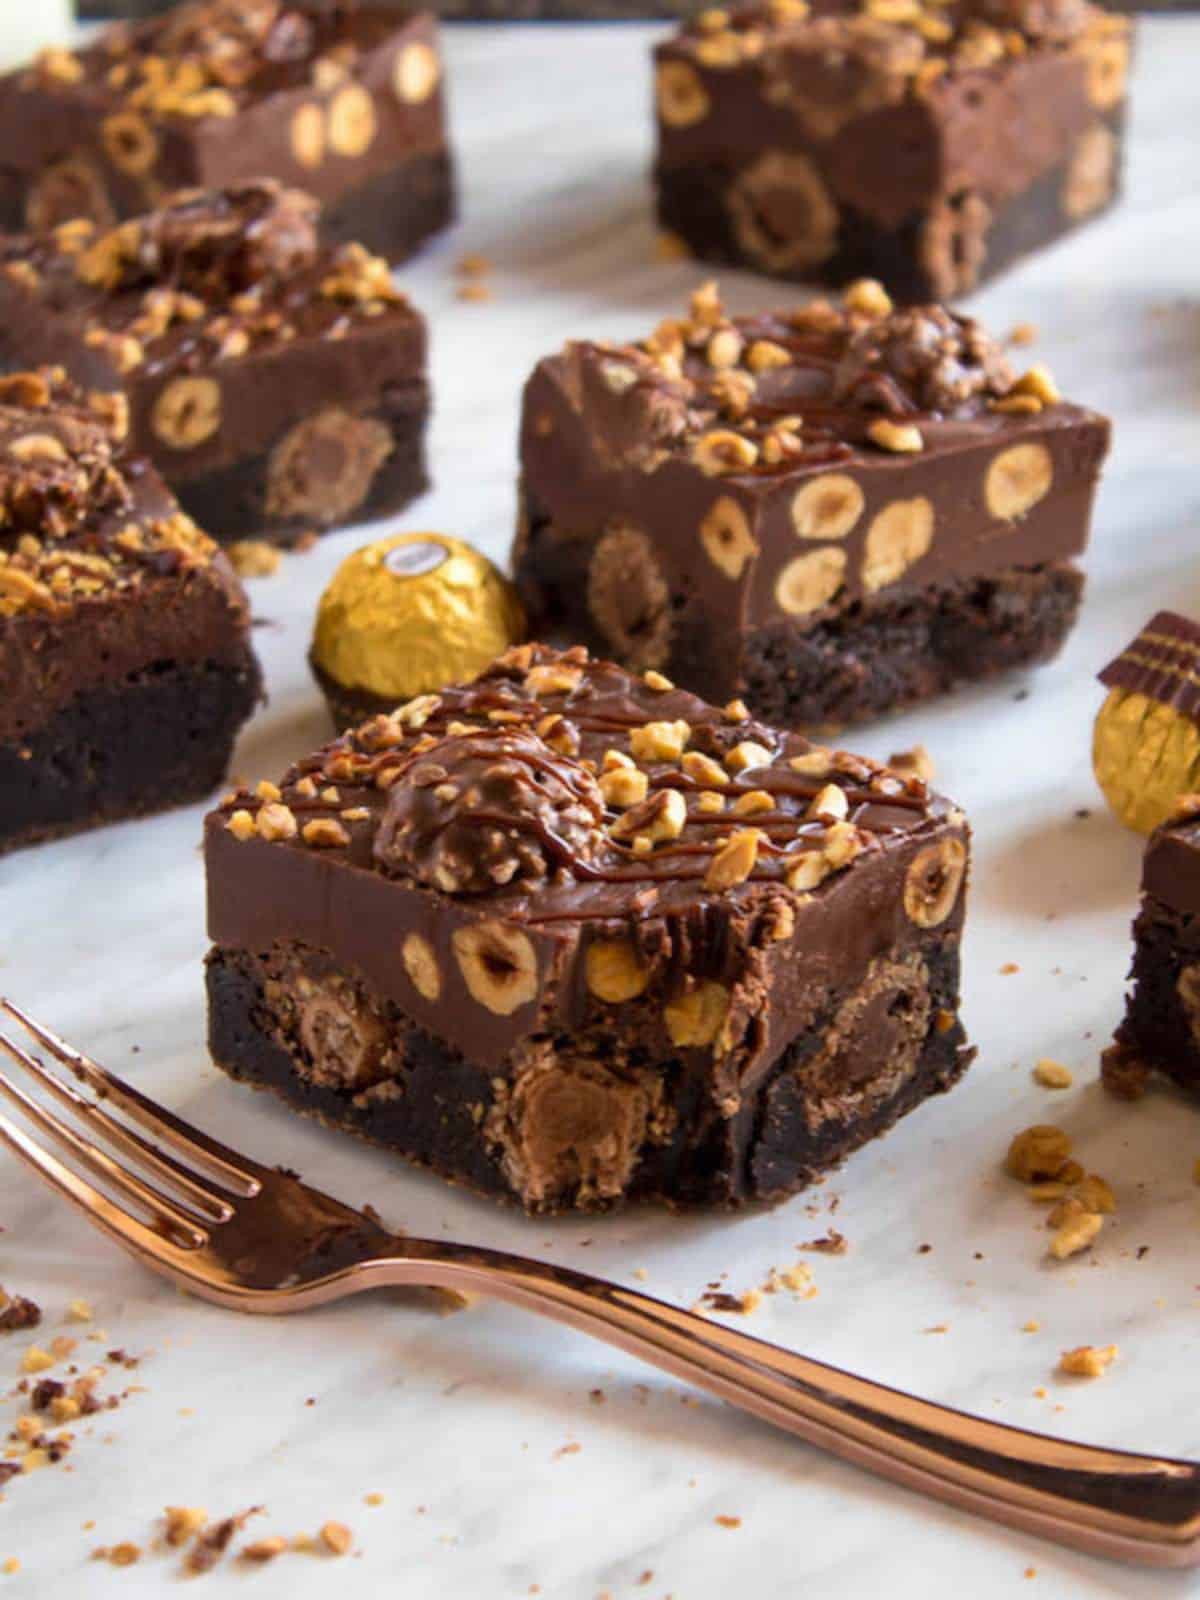 Ferrero Rocher fudge brownies topped with creamy Nutella fudge filled, Ferrero Rocher chocolates, and roasted hazelnuts.